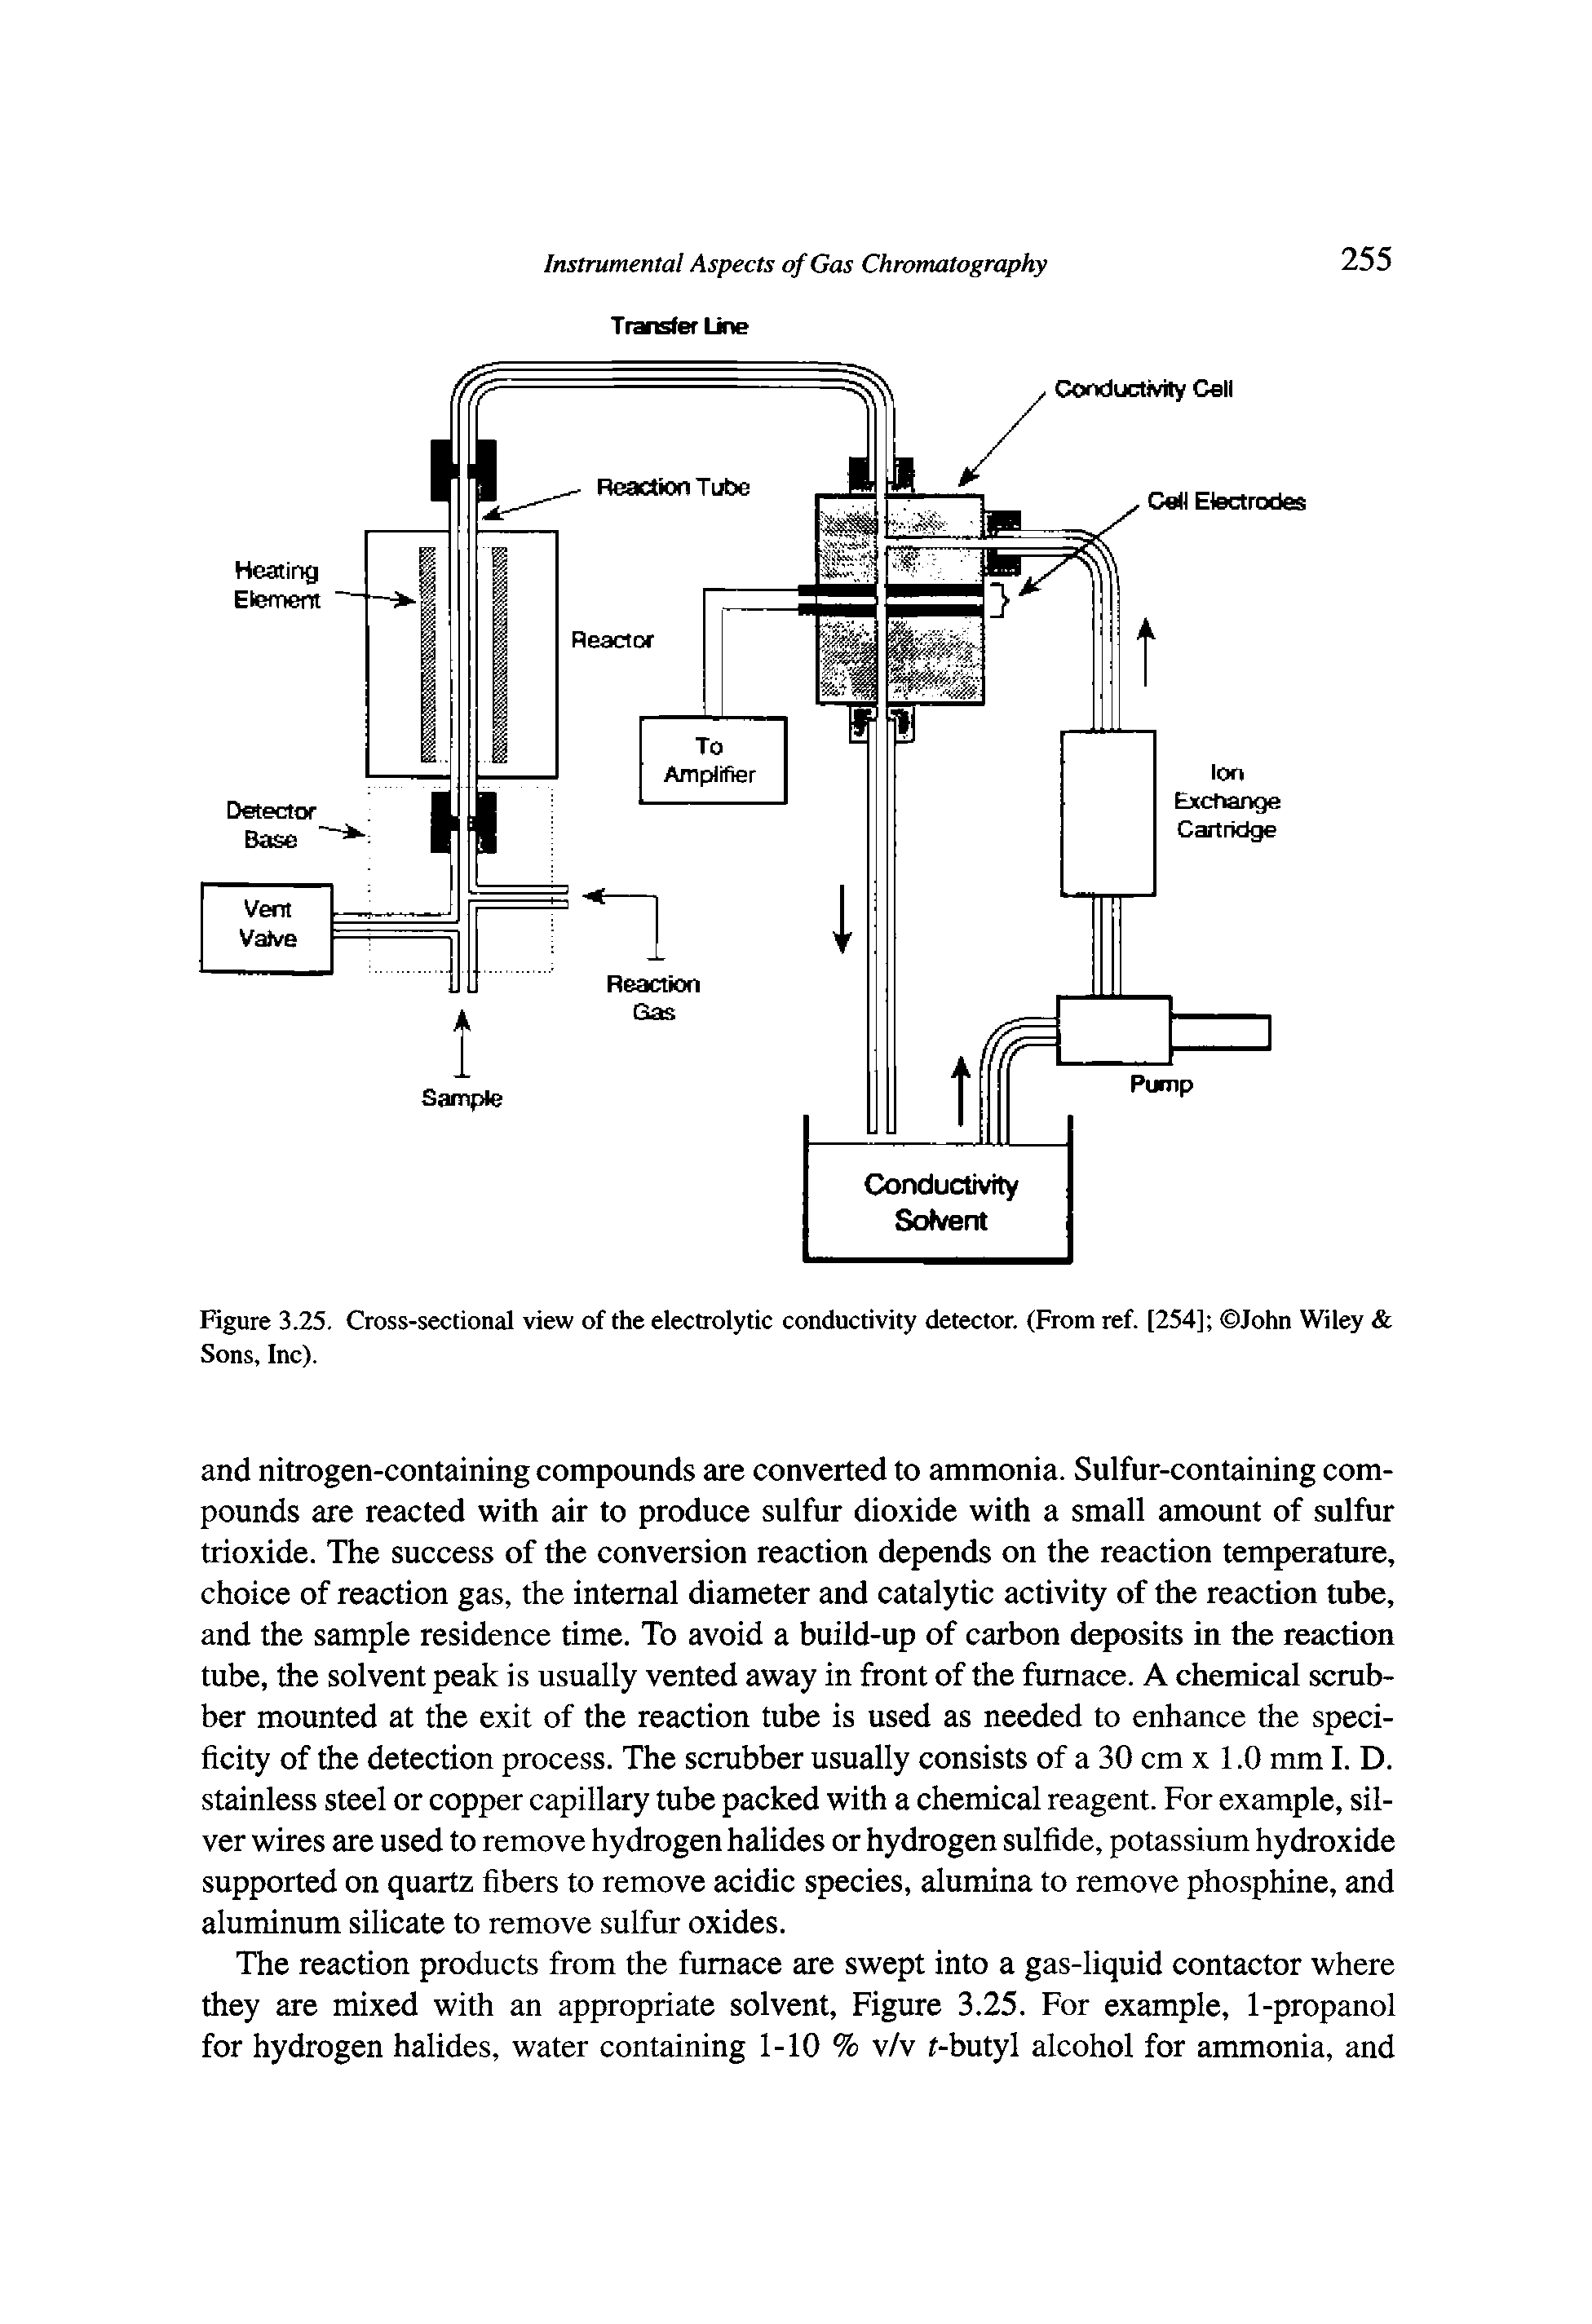 Figure 3.25, Cross-sectional view of the electrolytic conductivity detector. (From ref. [254] John Wiley Sons, Inc).